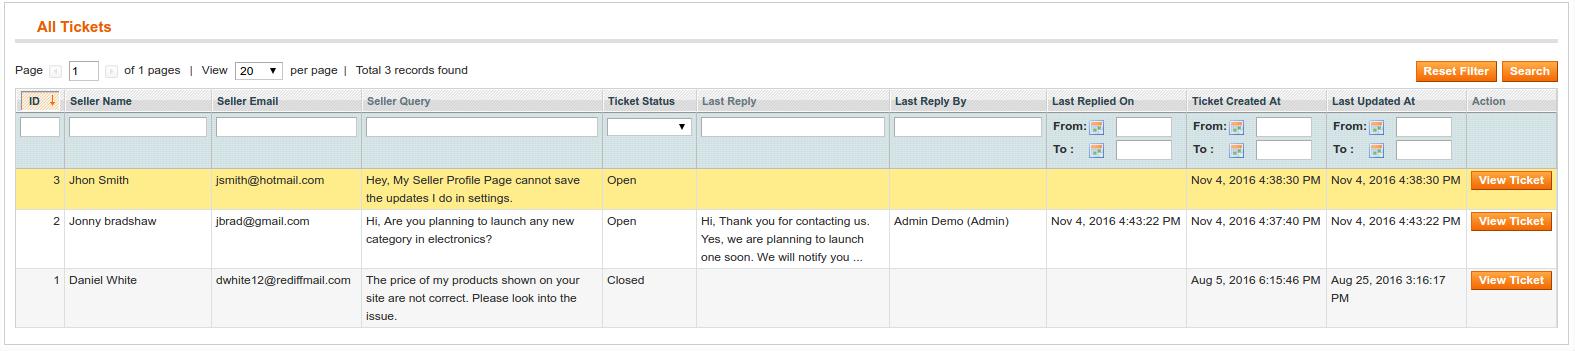 Magento Marketplace Contact Admin Addon-View Tickets.1 | Knowband